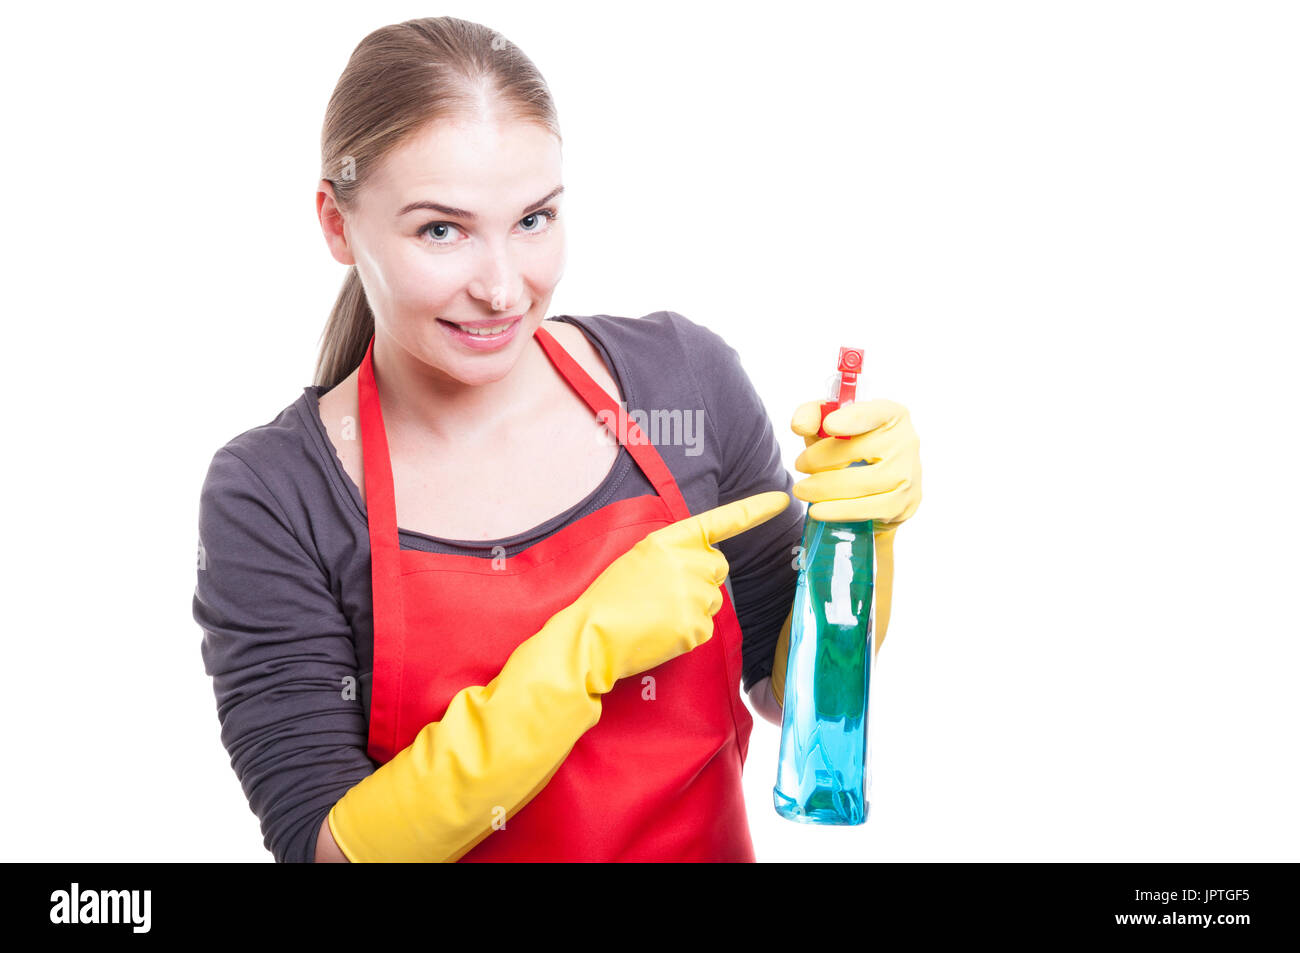 Pretty smiling housekeeper with rubber gloves and apron holding cleaning spray Stock Photo